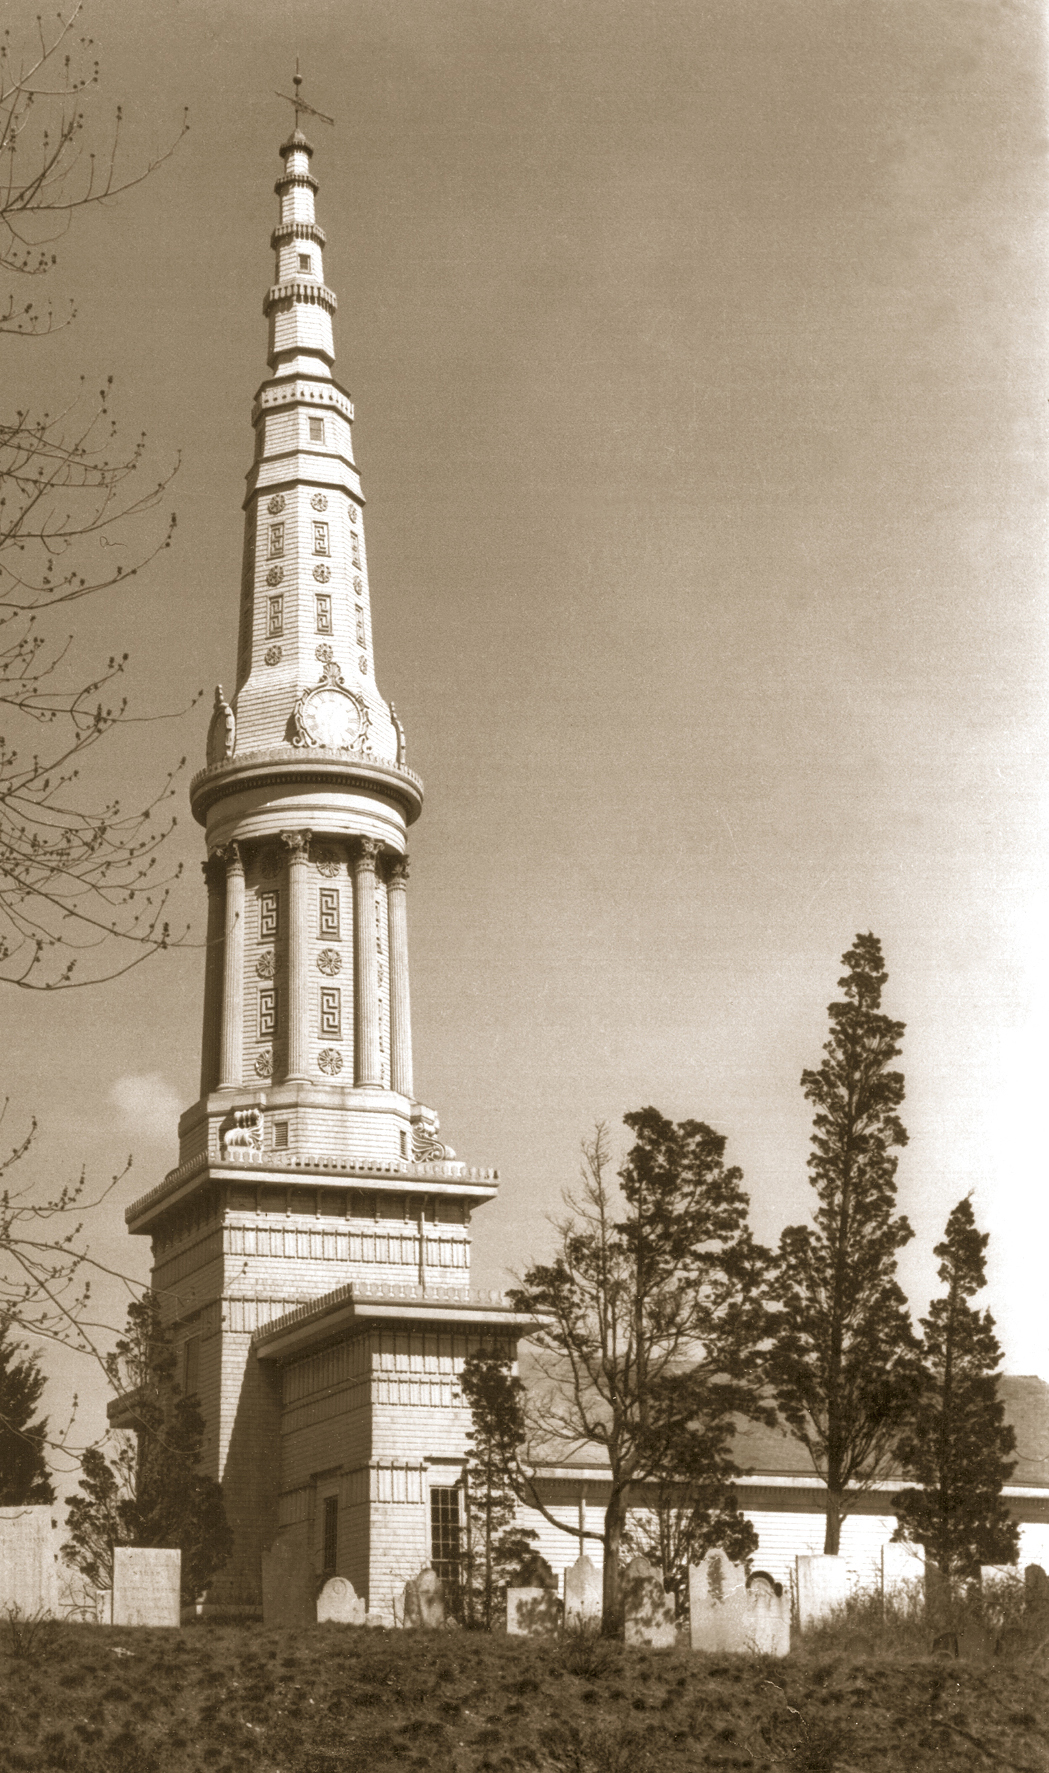 The First Presbyterian (Old Whalers') Church of Sag Harbor shortly before the 1938 Hurricane blew off its 185-foot-tall steeple.